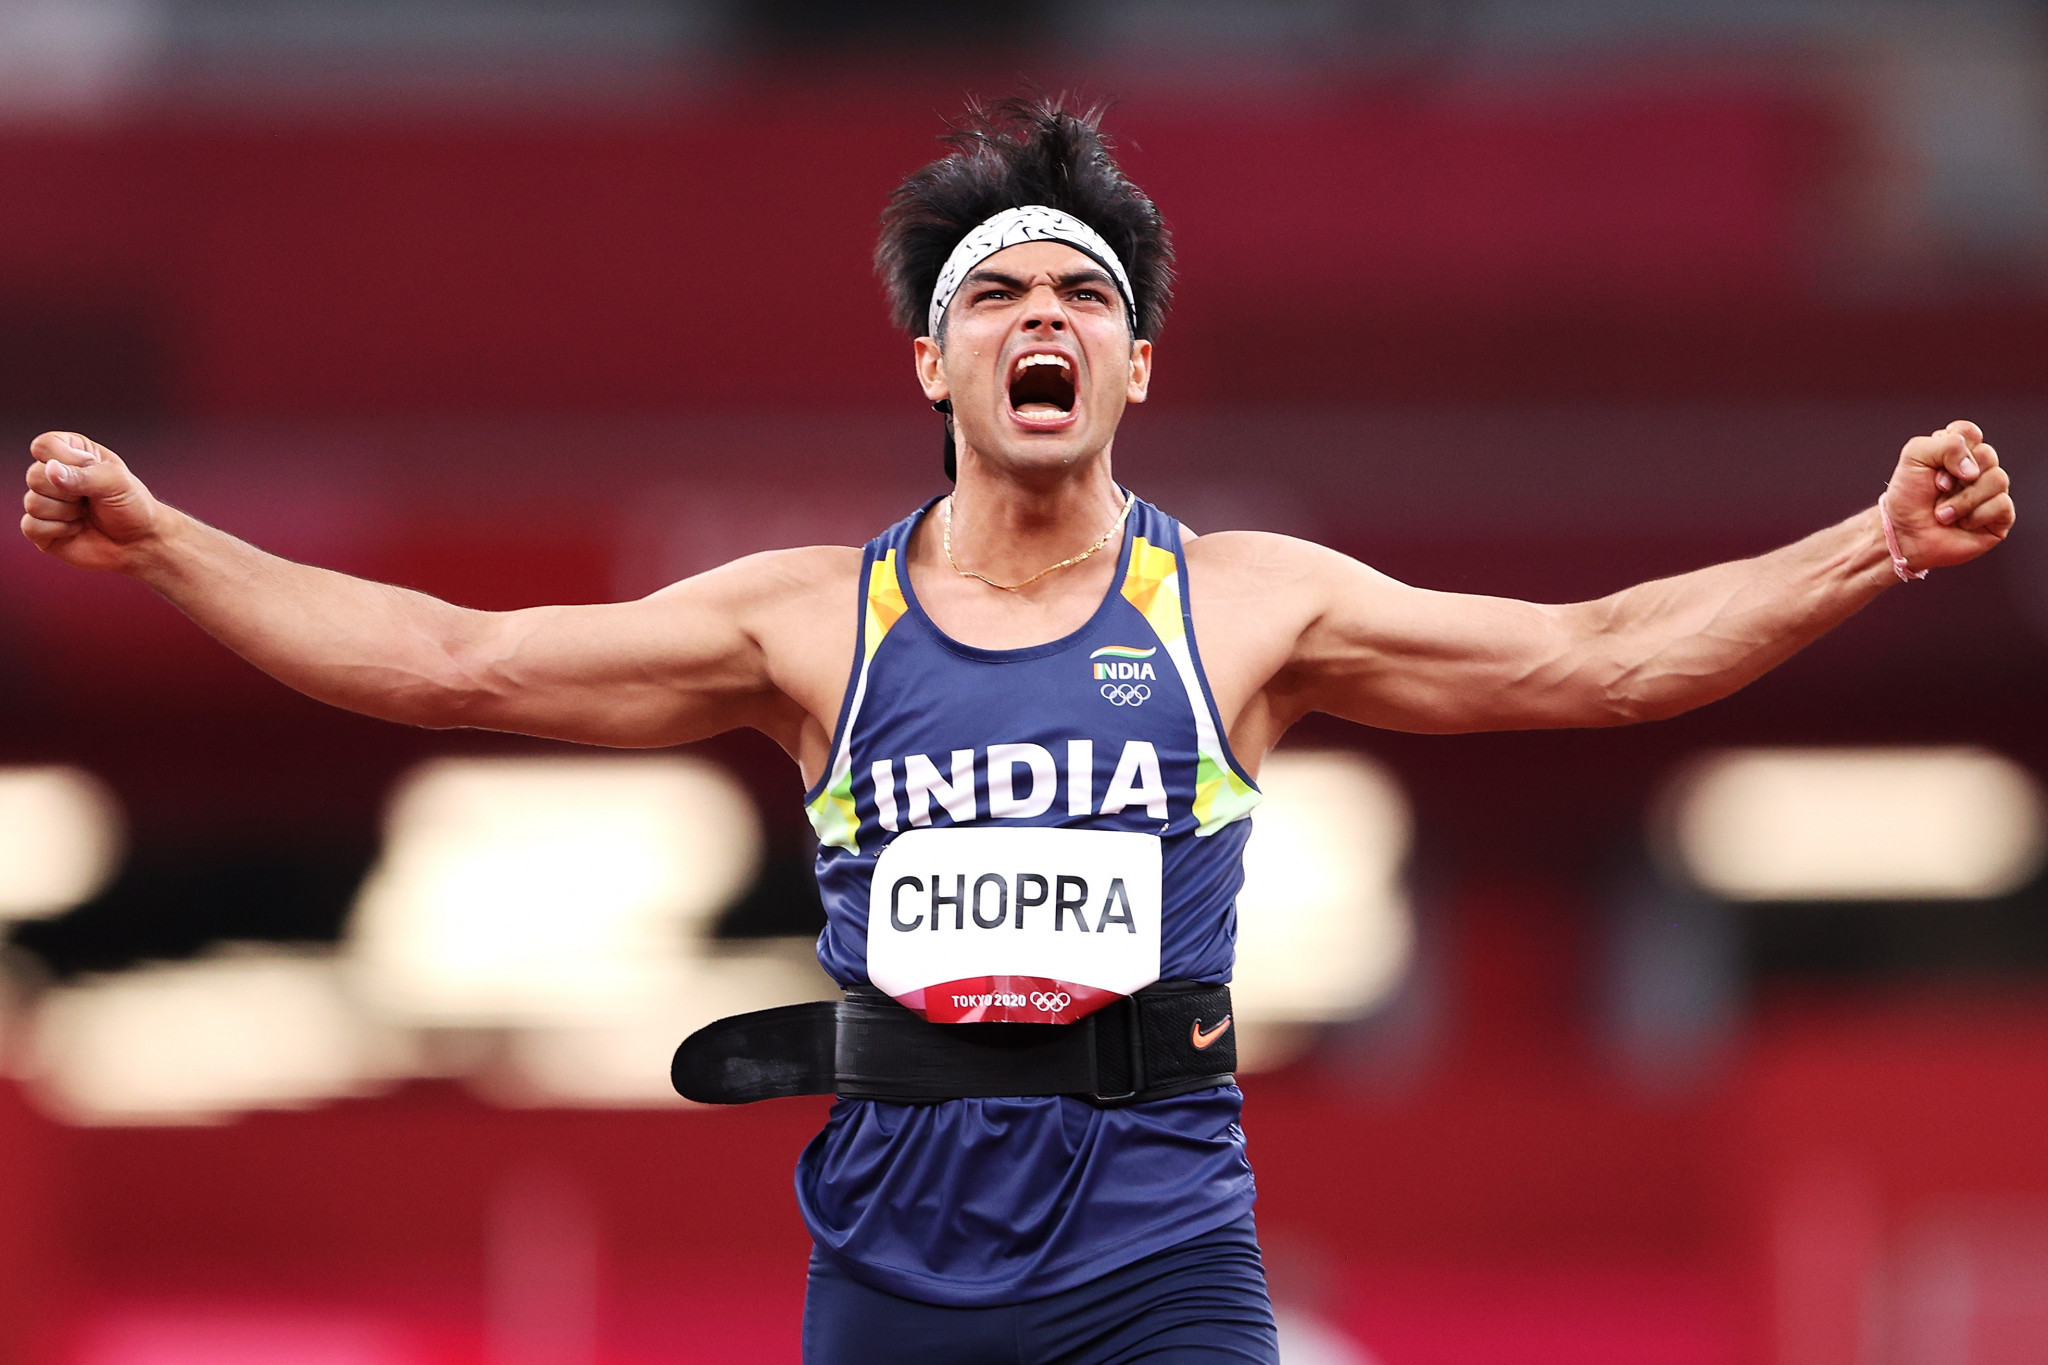 Neeraj Chopra is currently training in the US and may find it easier to compete in international events ©Getty Images